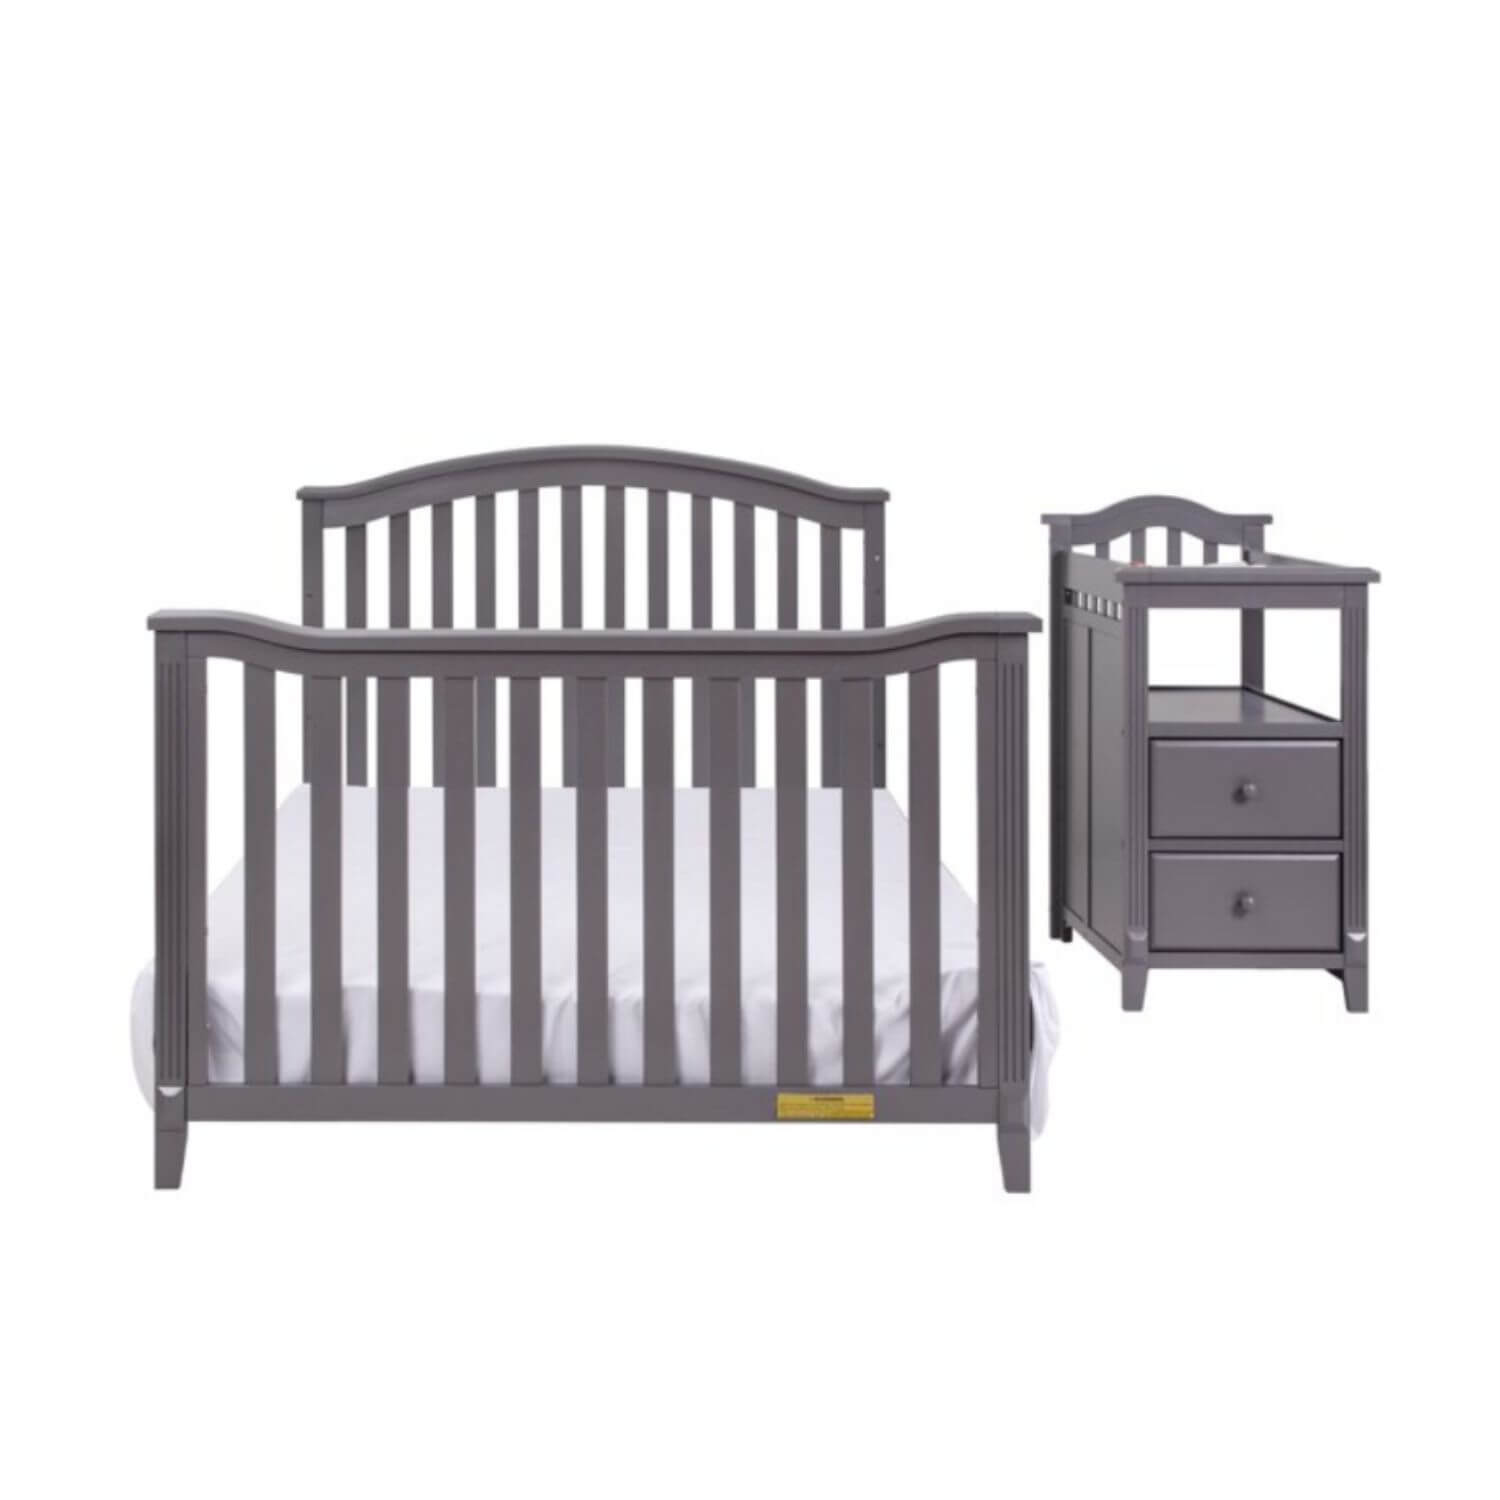 AFG Kali 4-in-1 Crib and Changer Combo Gray